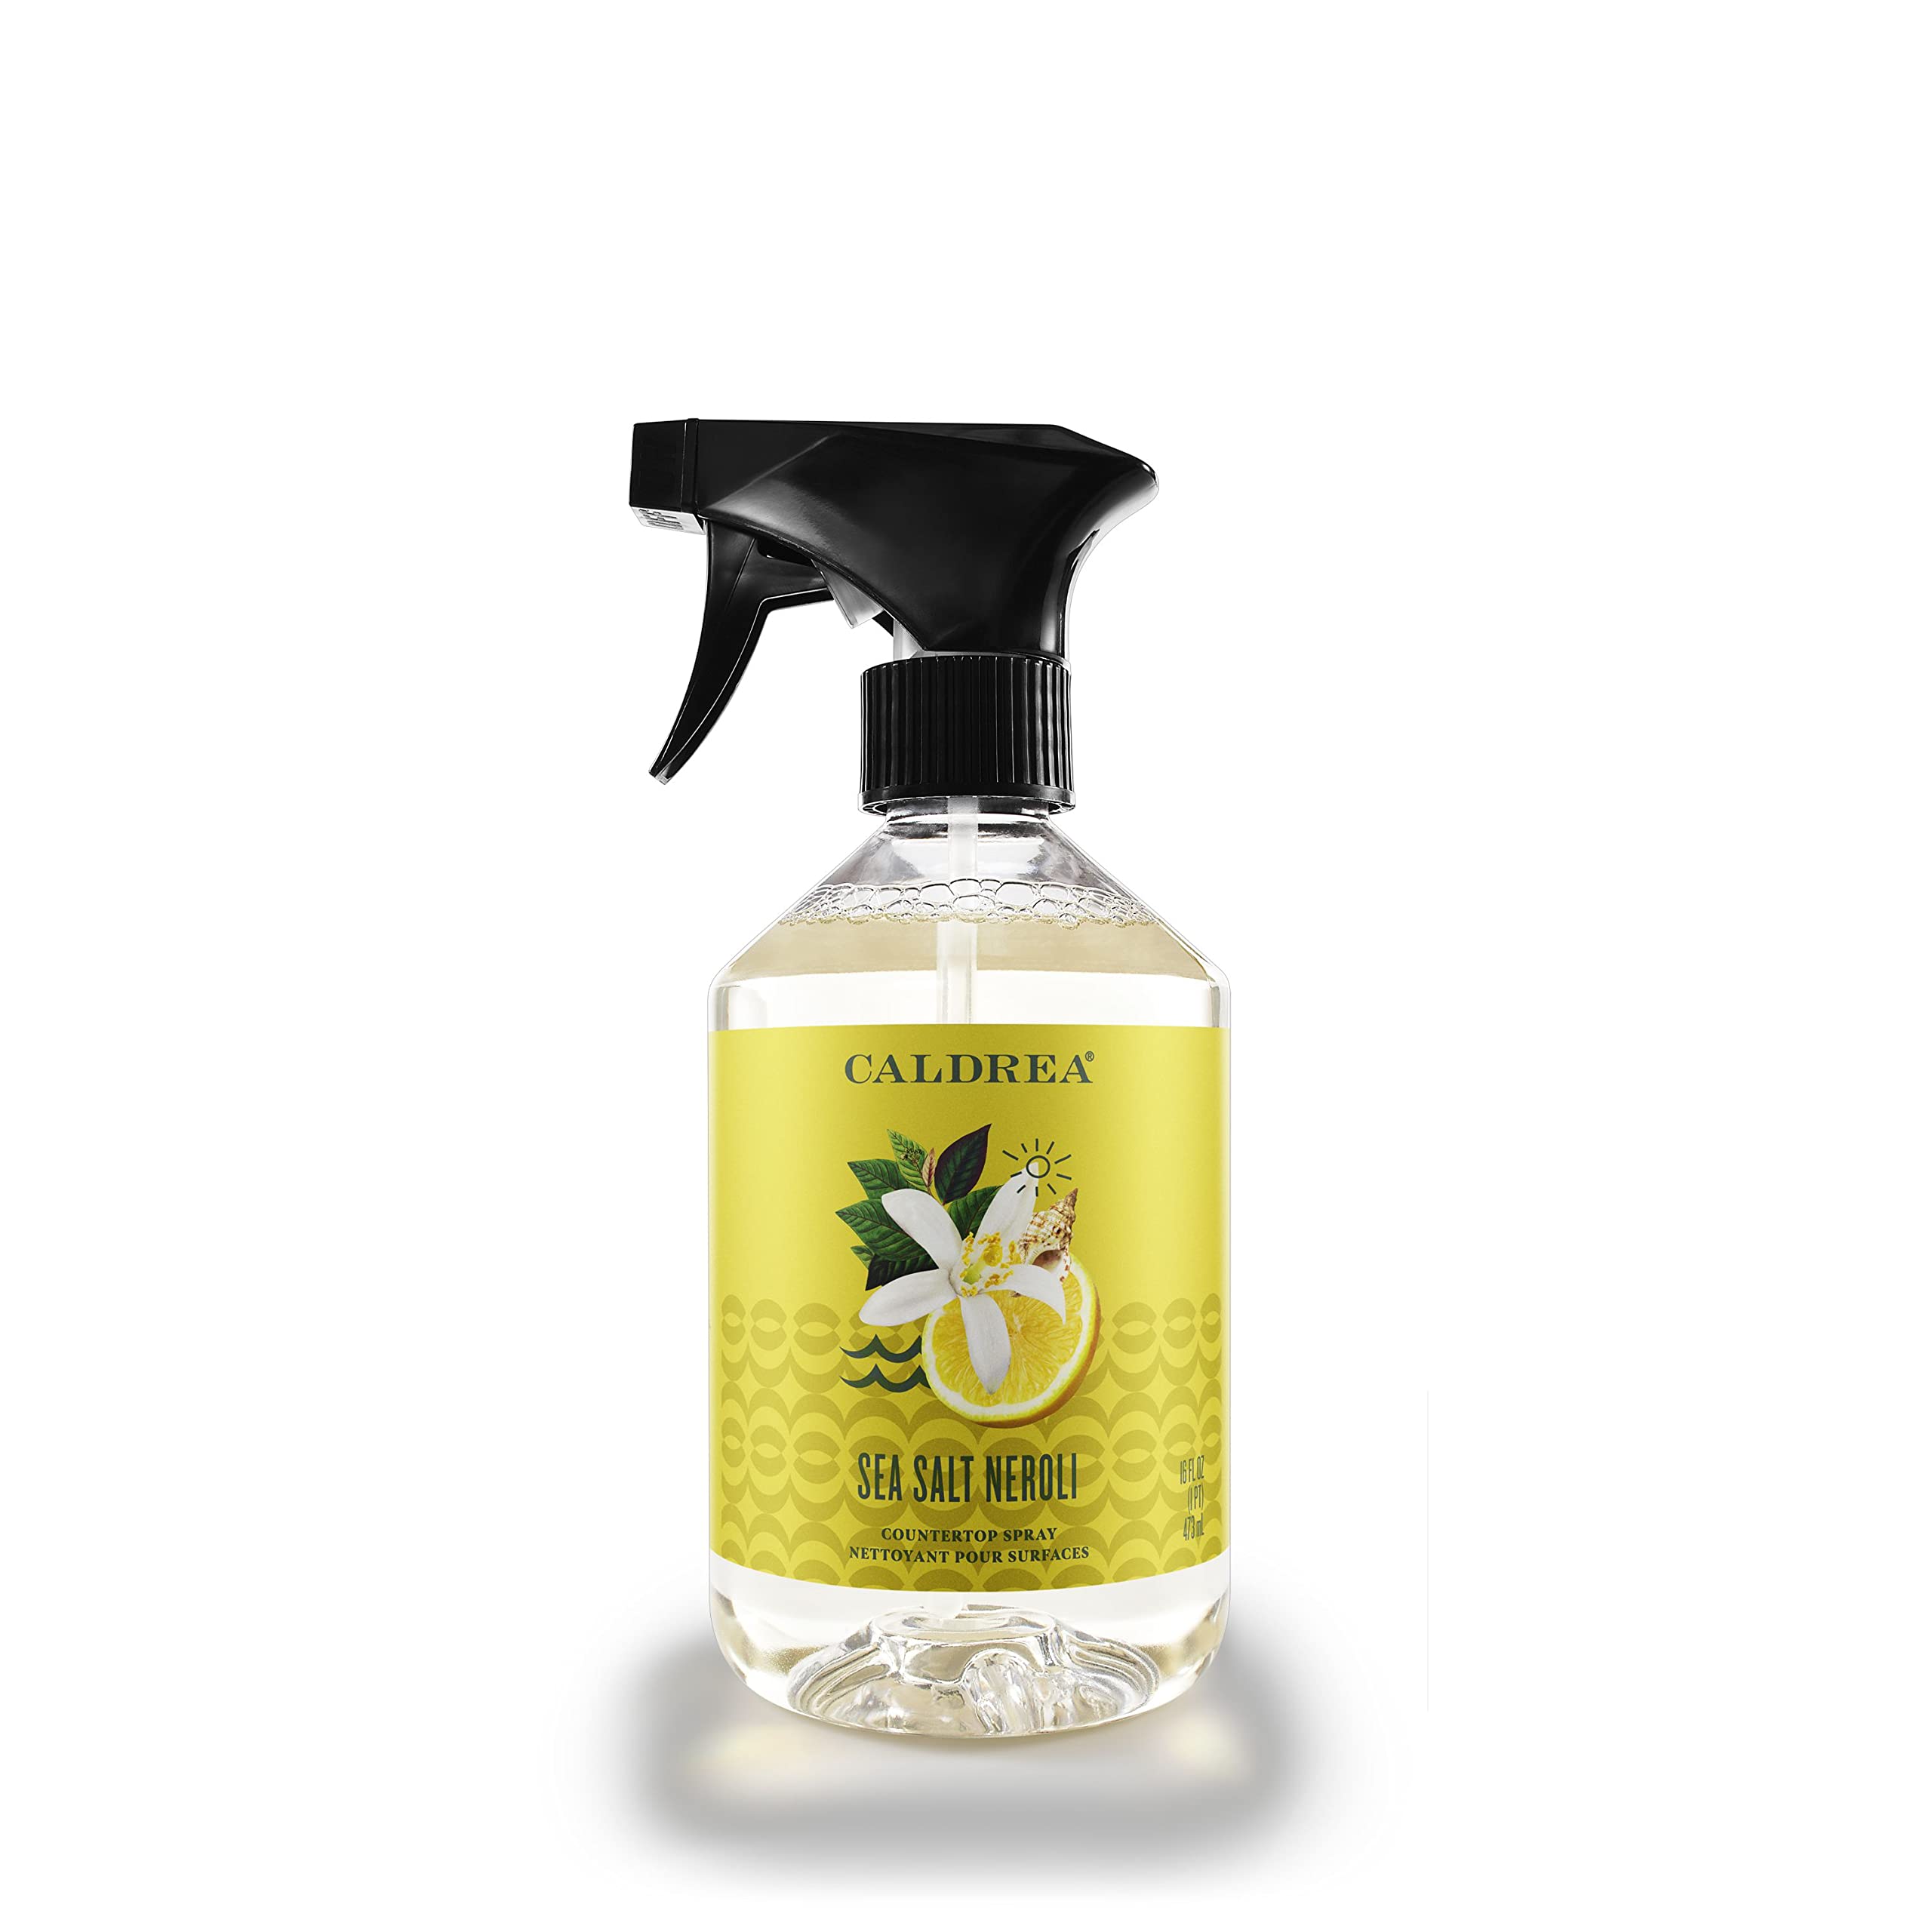 Caldrea Multi-surface Countertop Spray Cleaner, Made with Vegetable Protein Extract, Sea Salt Neroli Scent, 16 oz